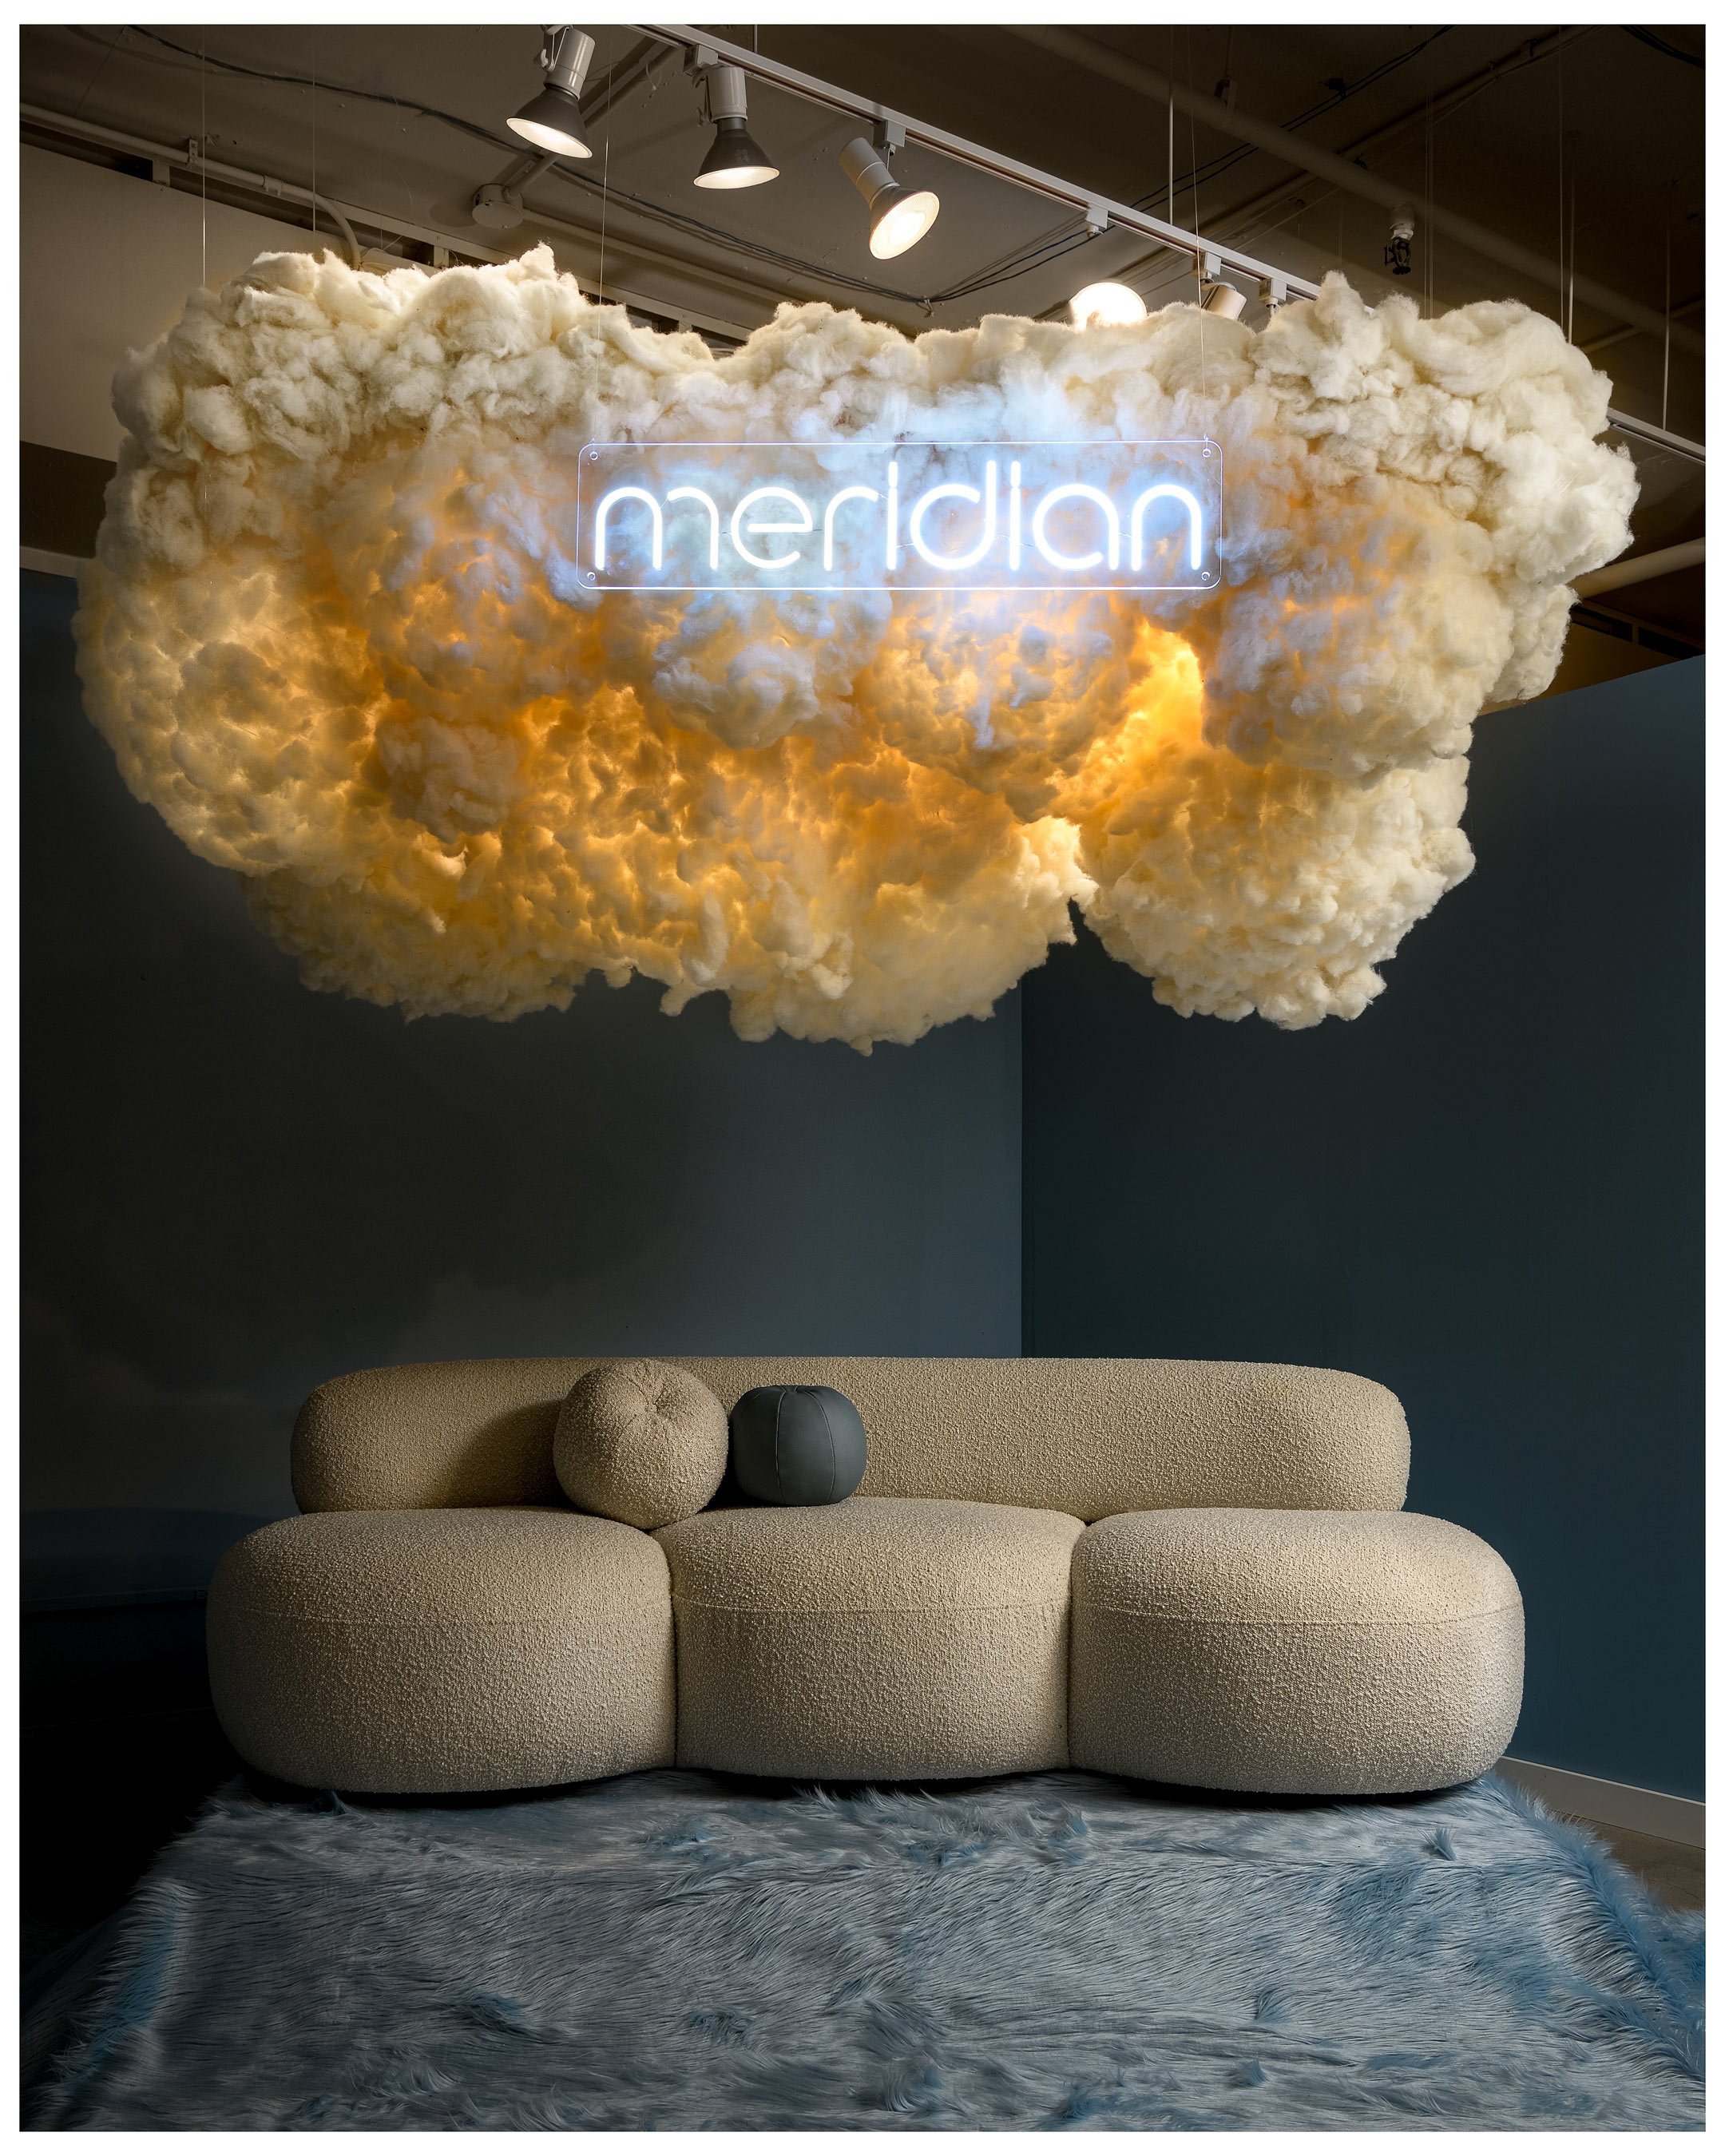 Marco-Basile-Images-Commercial-Photography-Meridian-Furniture-9.jpg